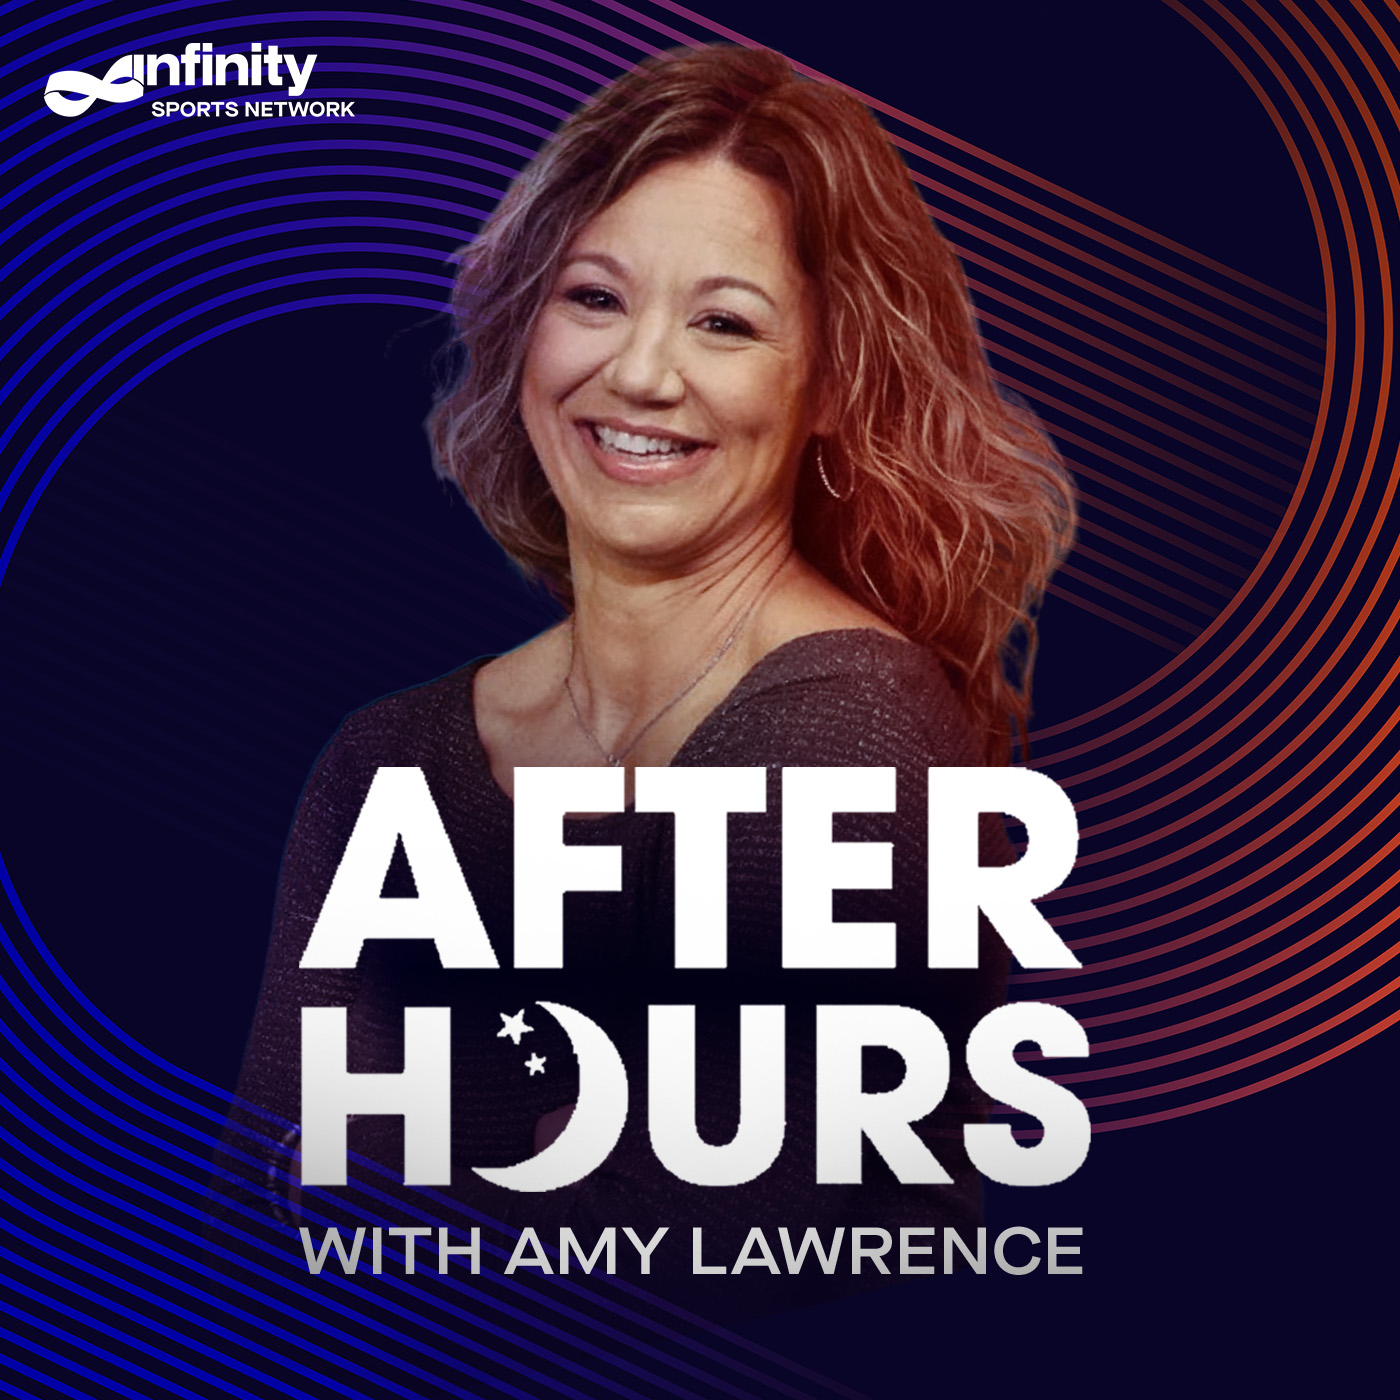 12-13-21 After Hours with Amy Lawrence PODCAST: Hour 3